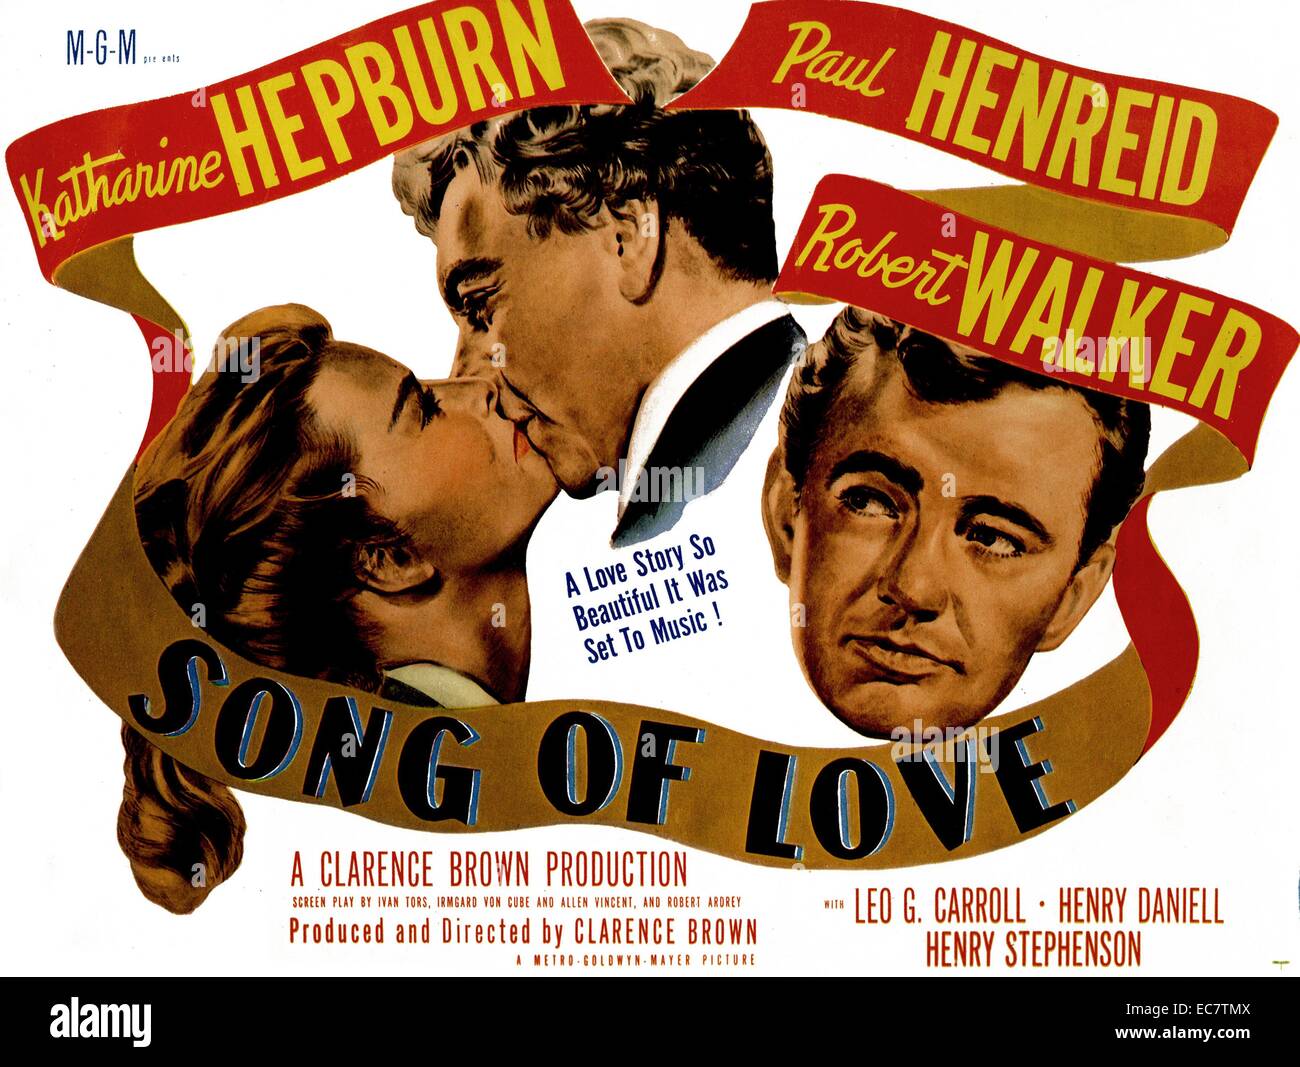 Song of Love, 1947, is a biopic starring Katharine Hepburn, Paul Henreid, Robert Walker, and Leo G. Carroll and directed by Clarence Brown. The film was based on a play by Bernard Schubert and Mario Silva. Stock Photo